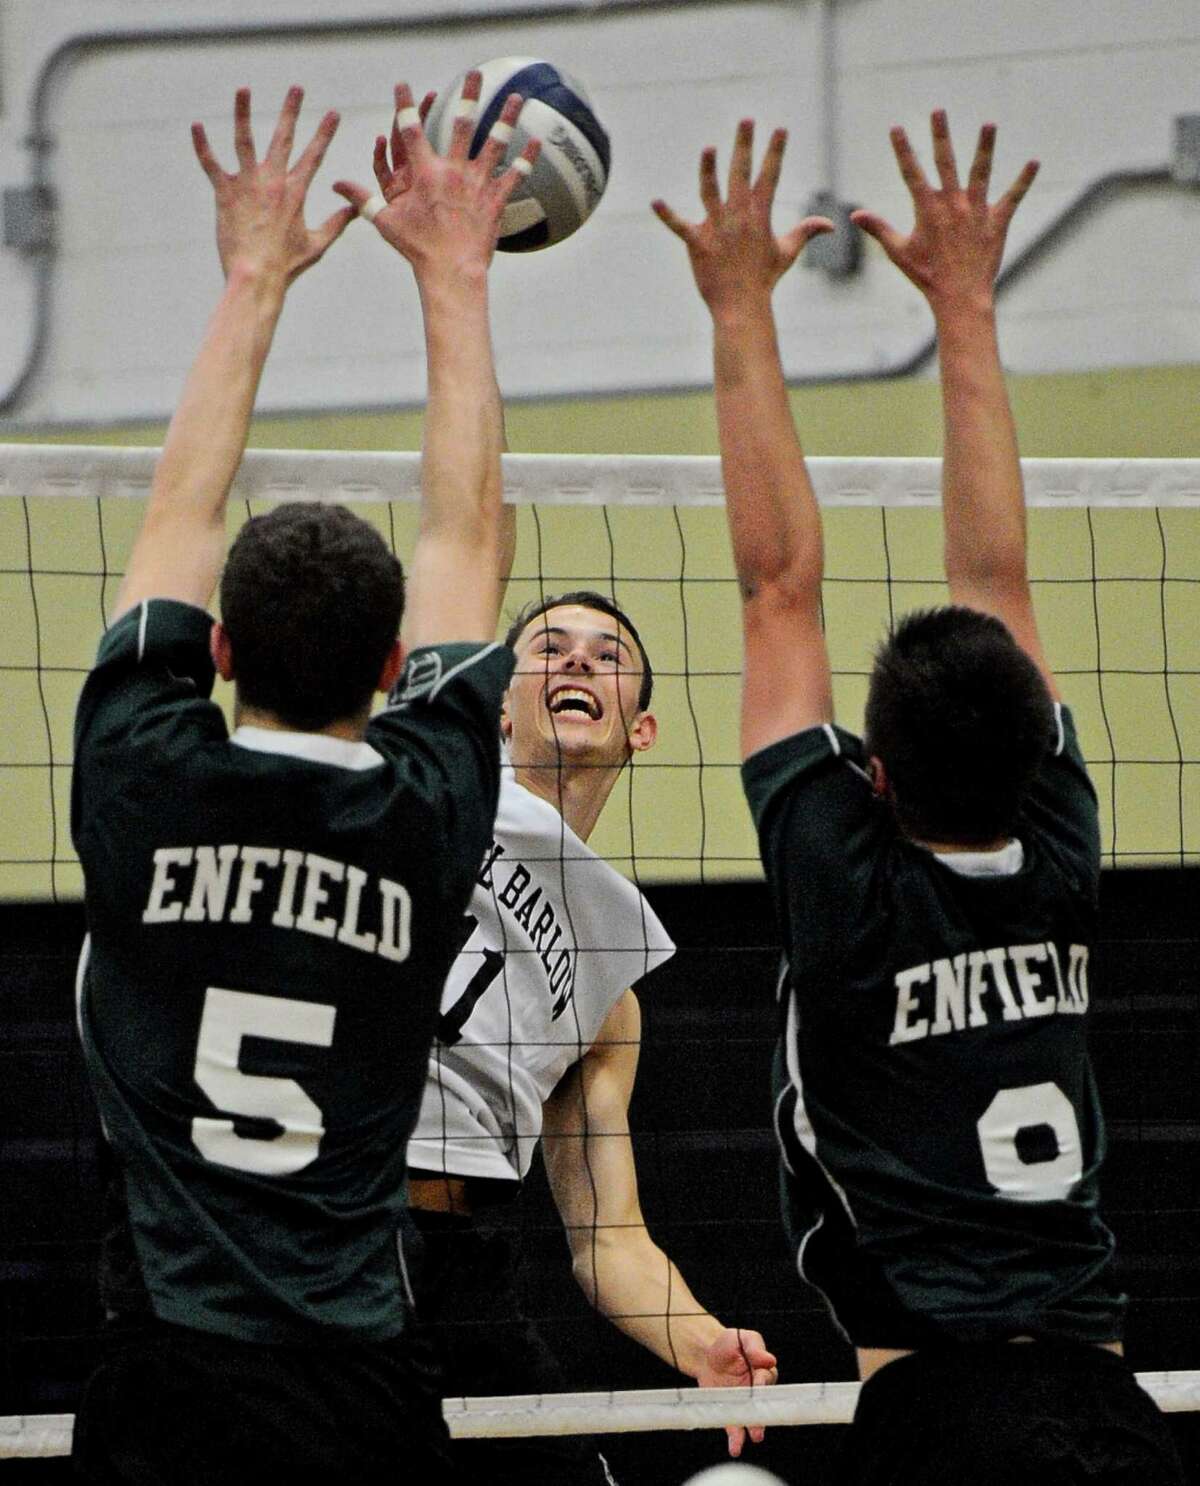 Joel Barlow's Ryan Corr (11) spikes the ball over Enfield's Dillon DeSouza (5) and Zachary Hirsch (8) in the State Class M boys volleyball quarterfinal game between Enfield and Joel Barlow high schools, on Friday night, June 3, 2016, at Joel Barlow High School, Redding, Conn.